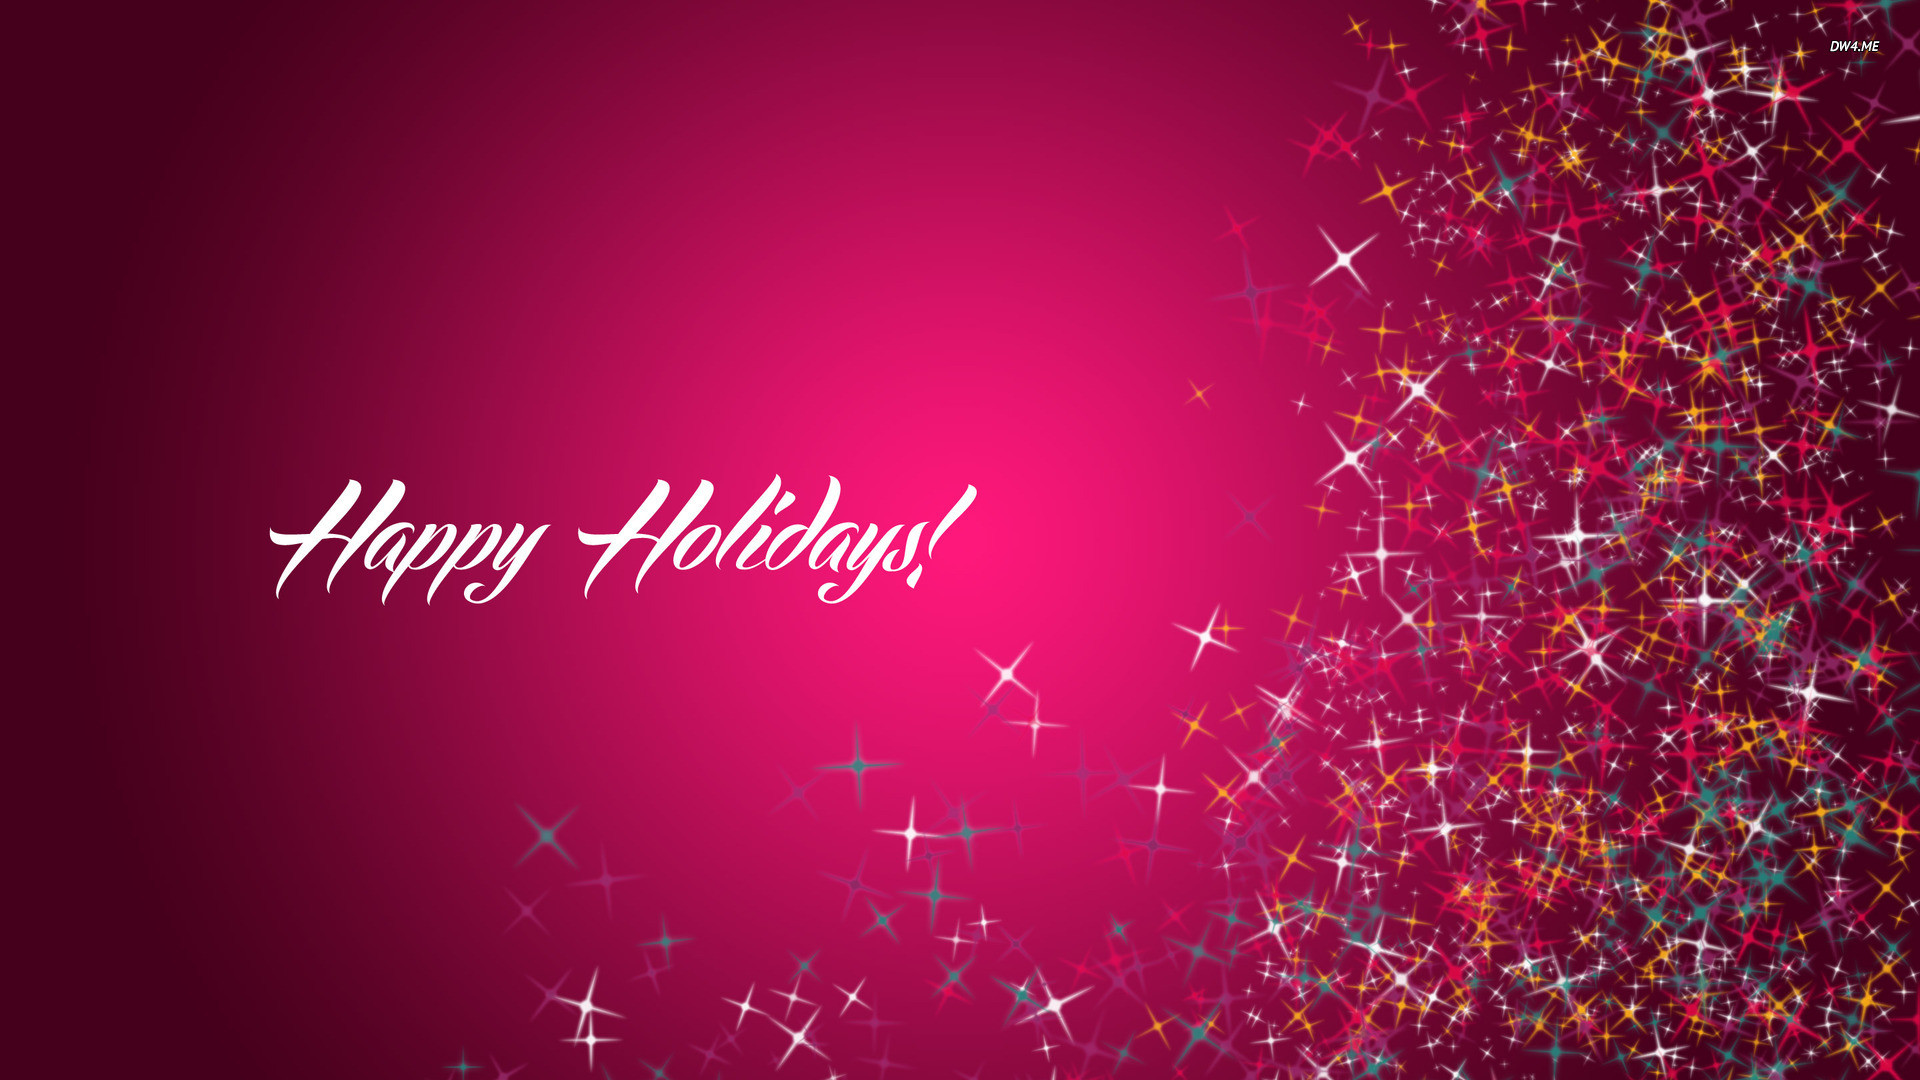 1920x1080 Holiday HD Wallpapers